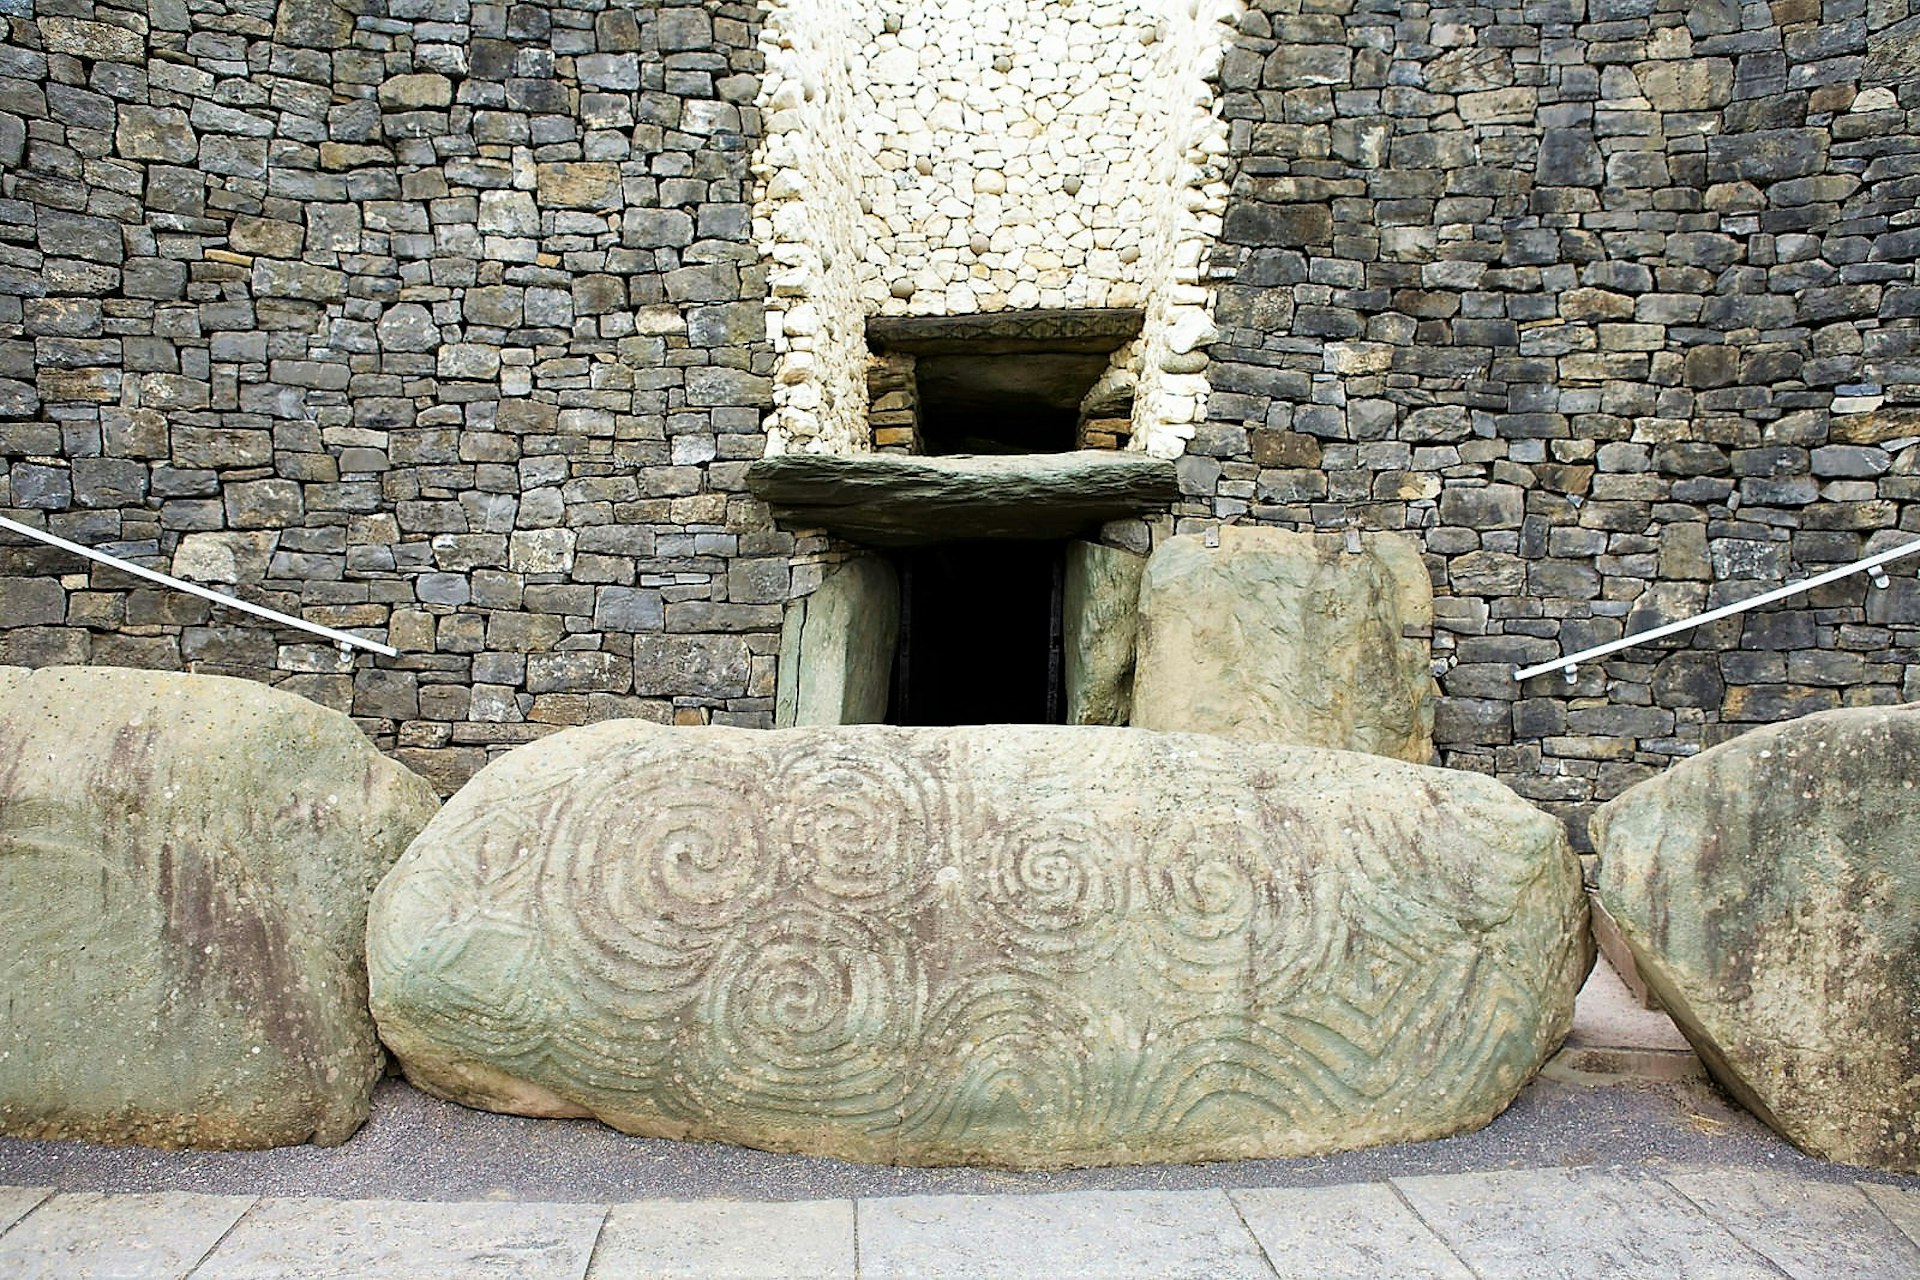 Giant stones mark the entrance to Newgrange in Brú Na Bóinne ancient site in Meath, Ireland. 